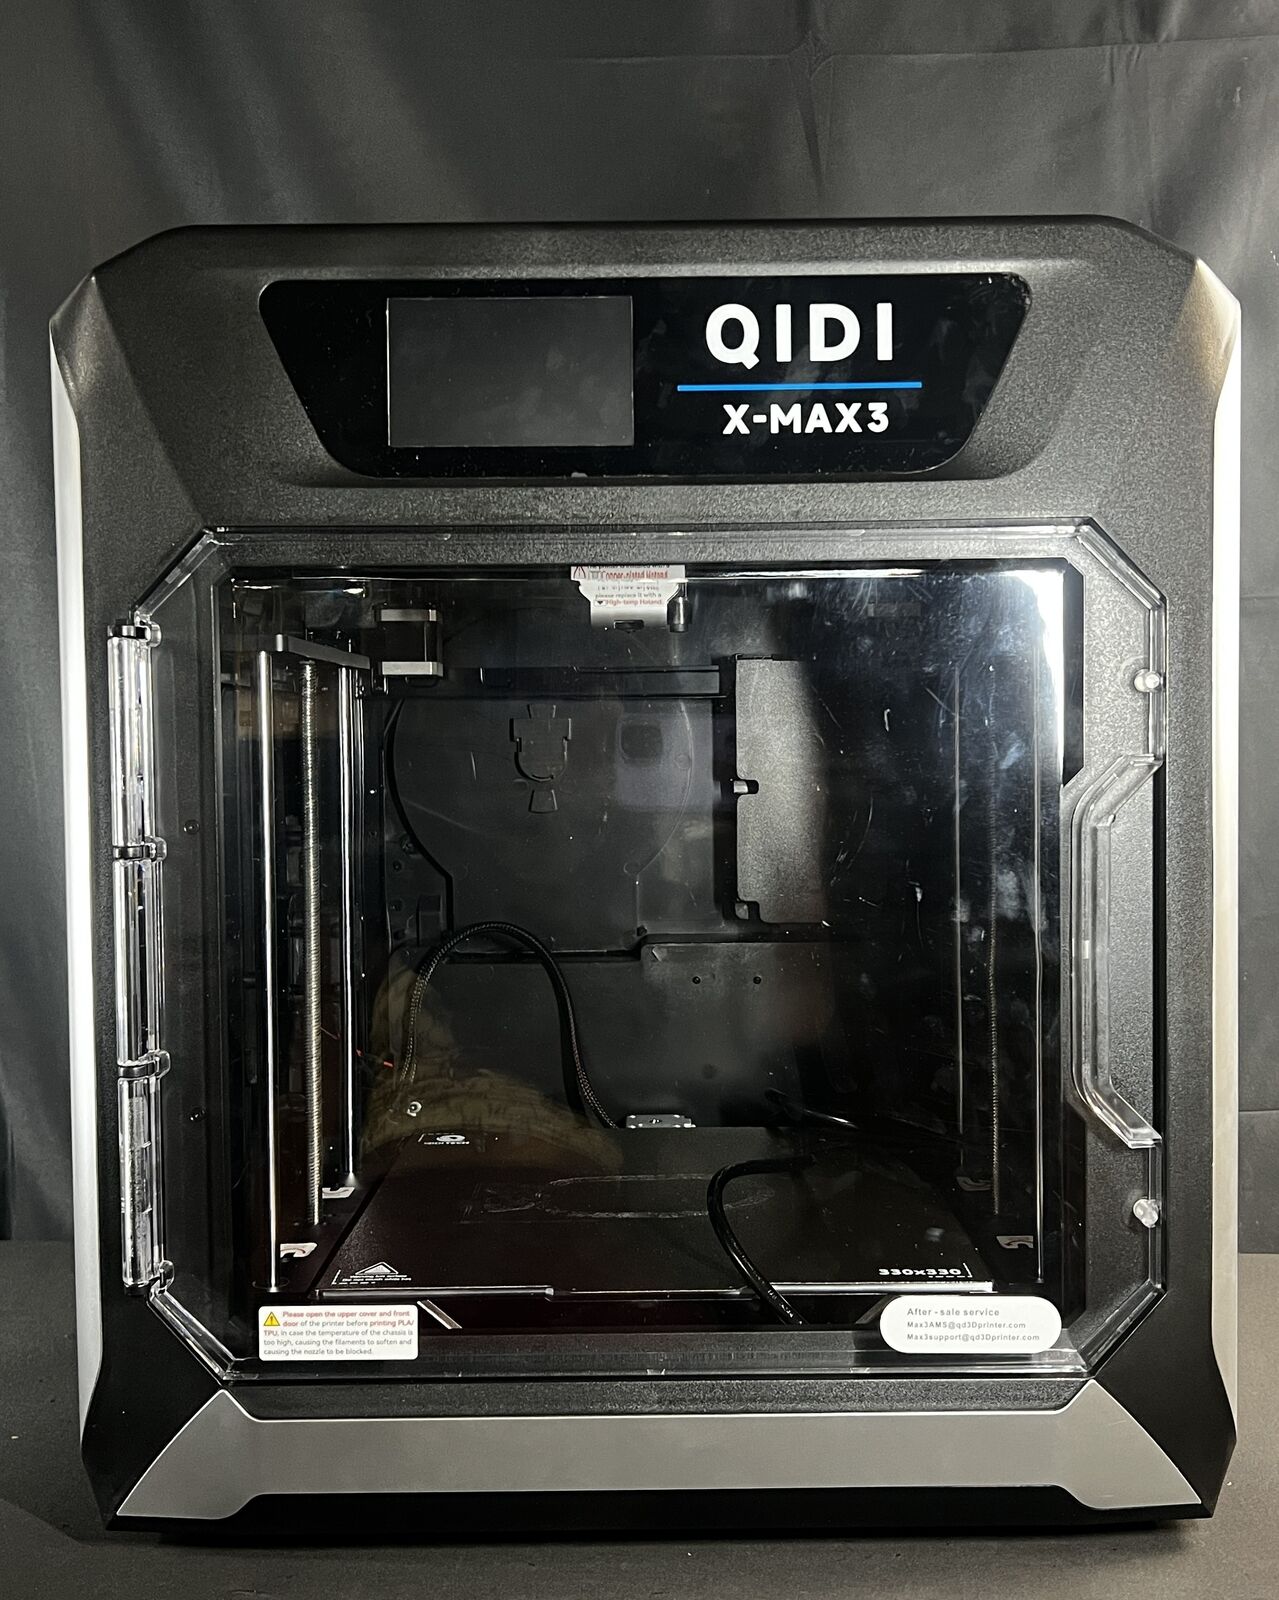 QIDI X-MAX 3 Industrial Grade FDM Large 3D Printer Only Used Read